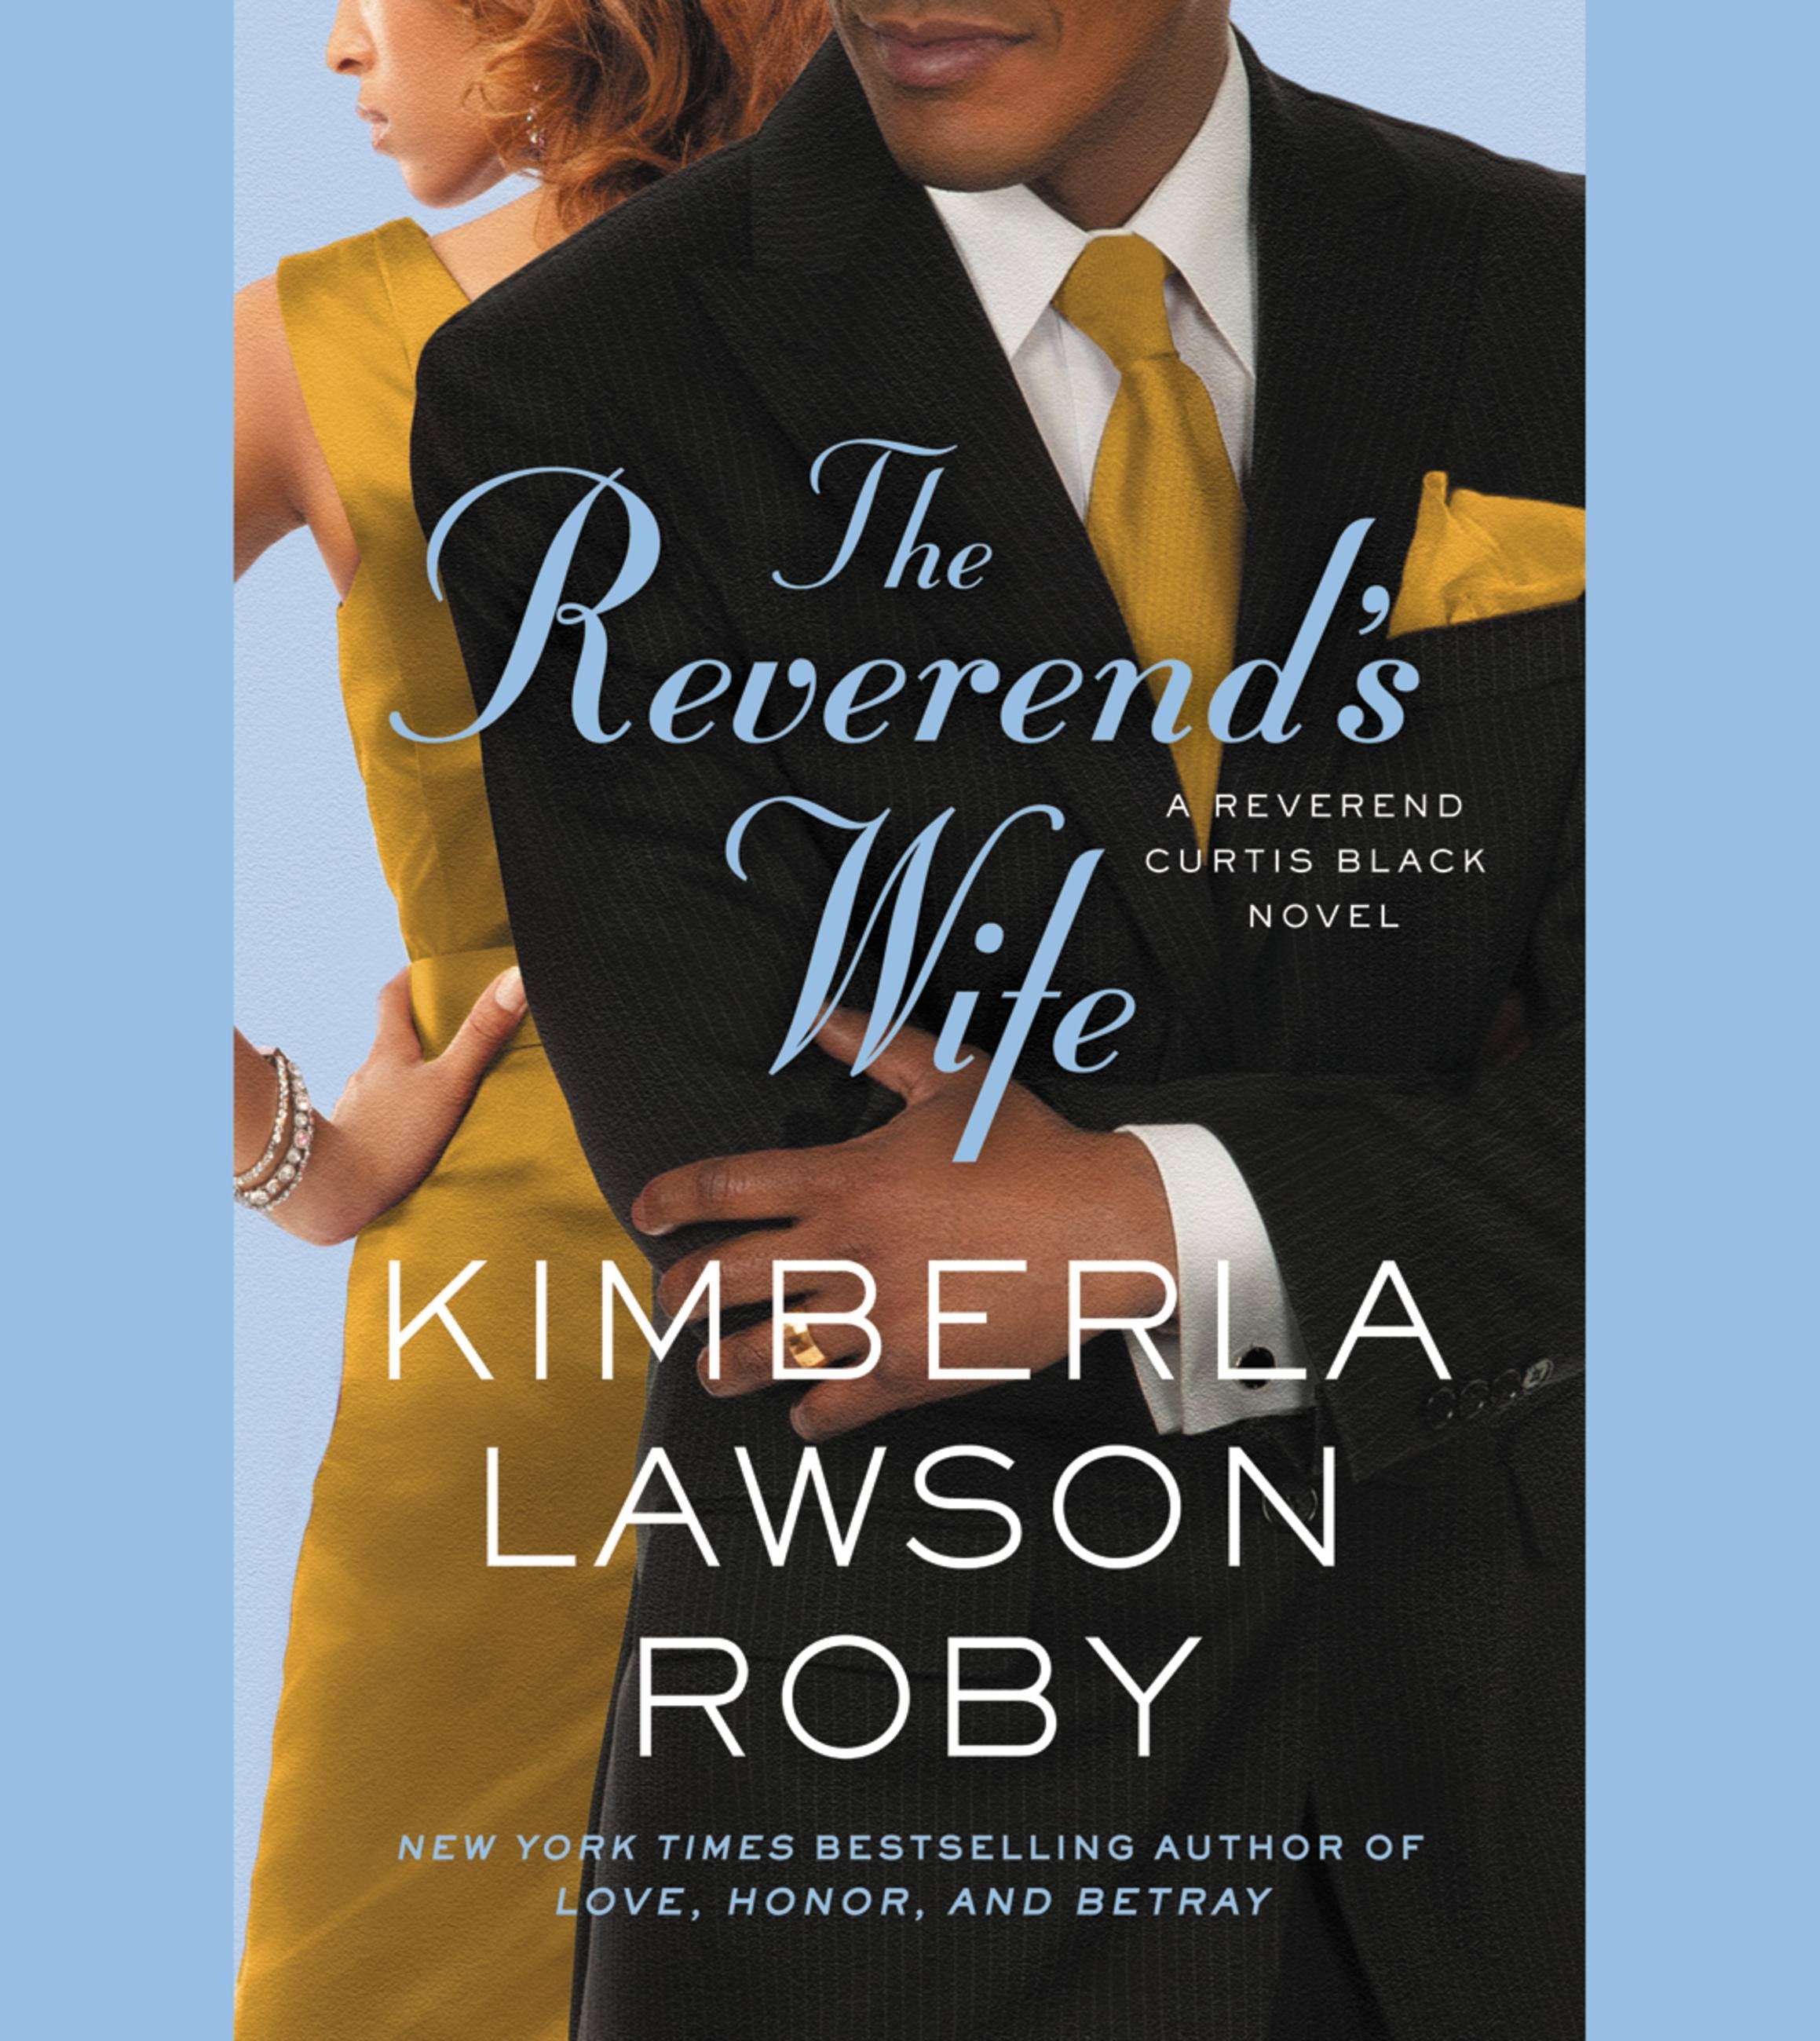 The Reverend's Wife by Kimberla Lawson Roby Hachette Book Group